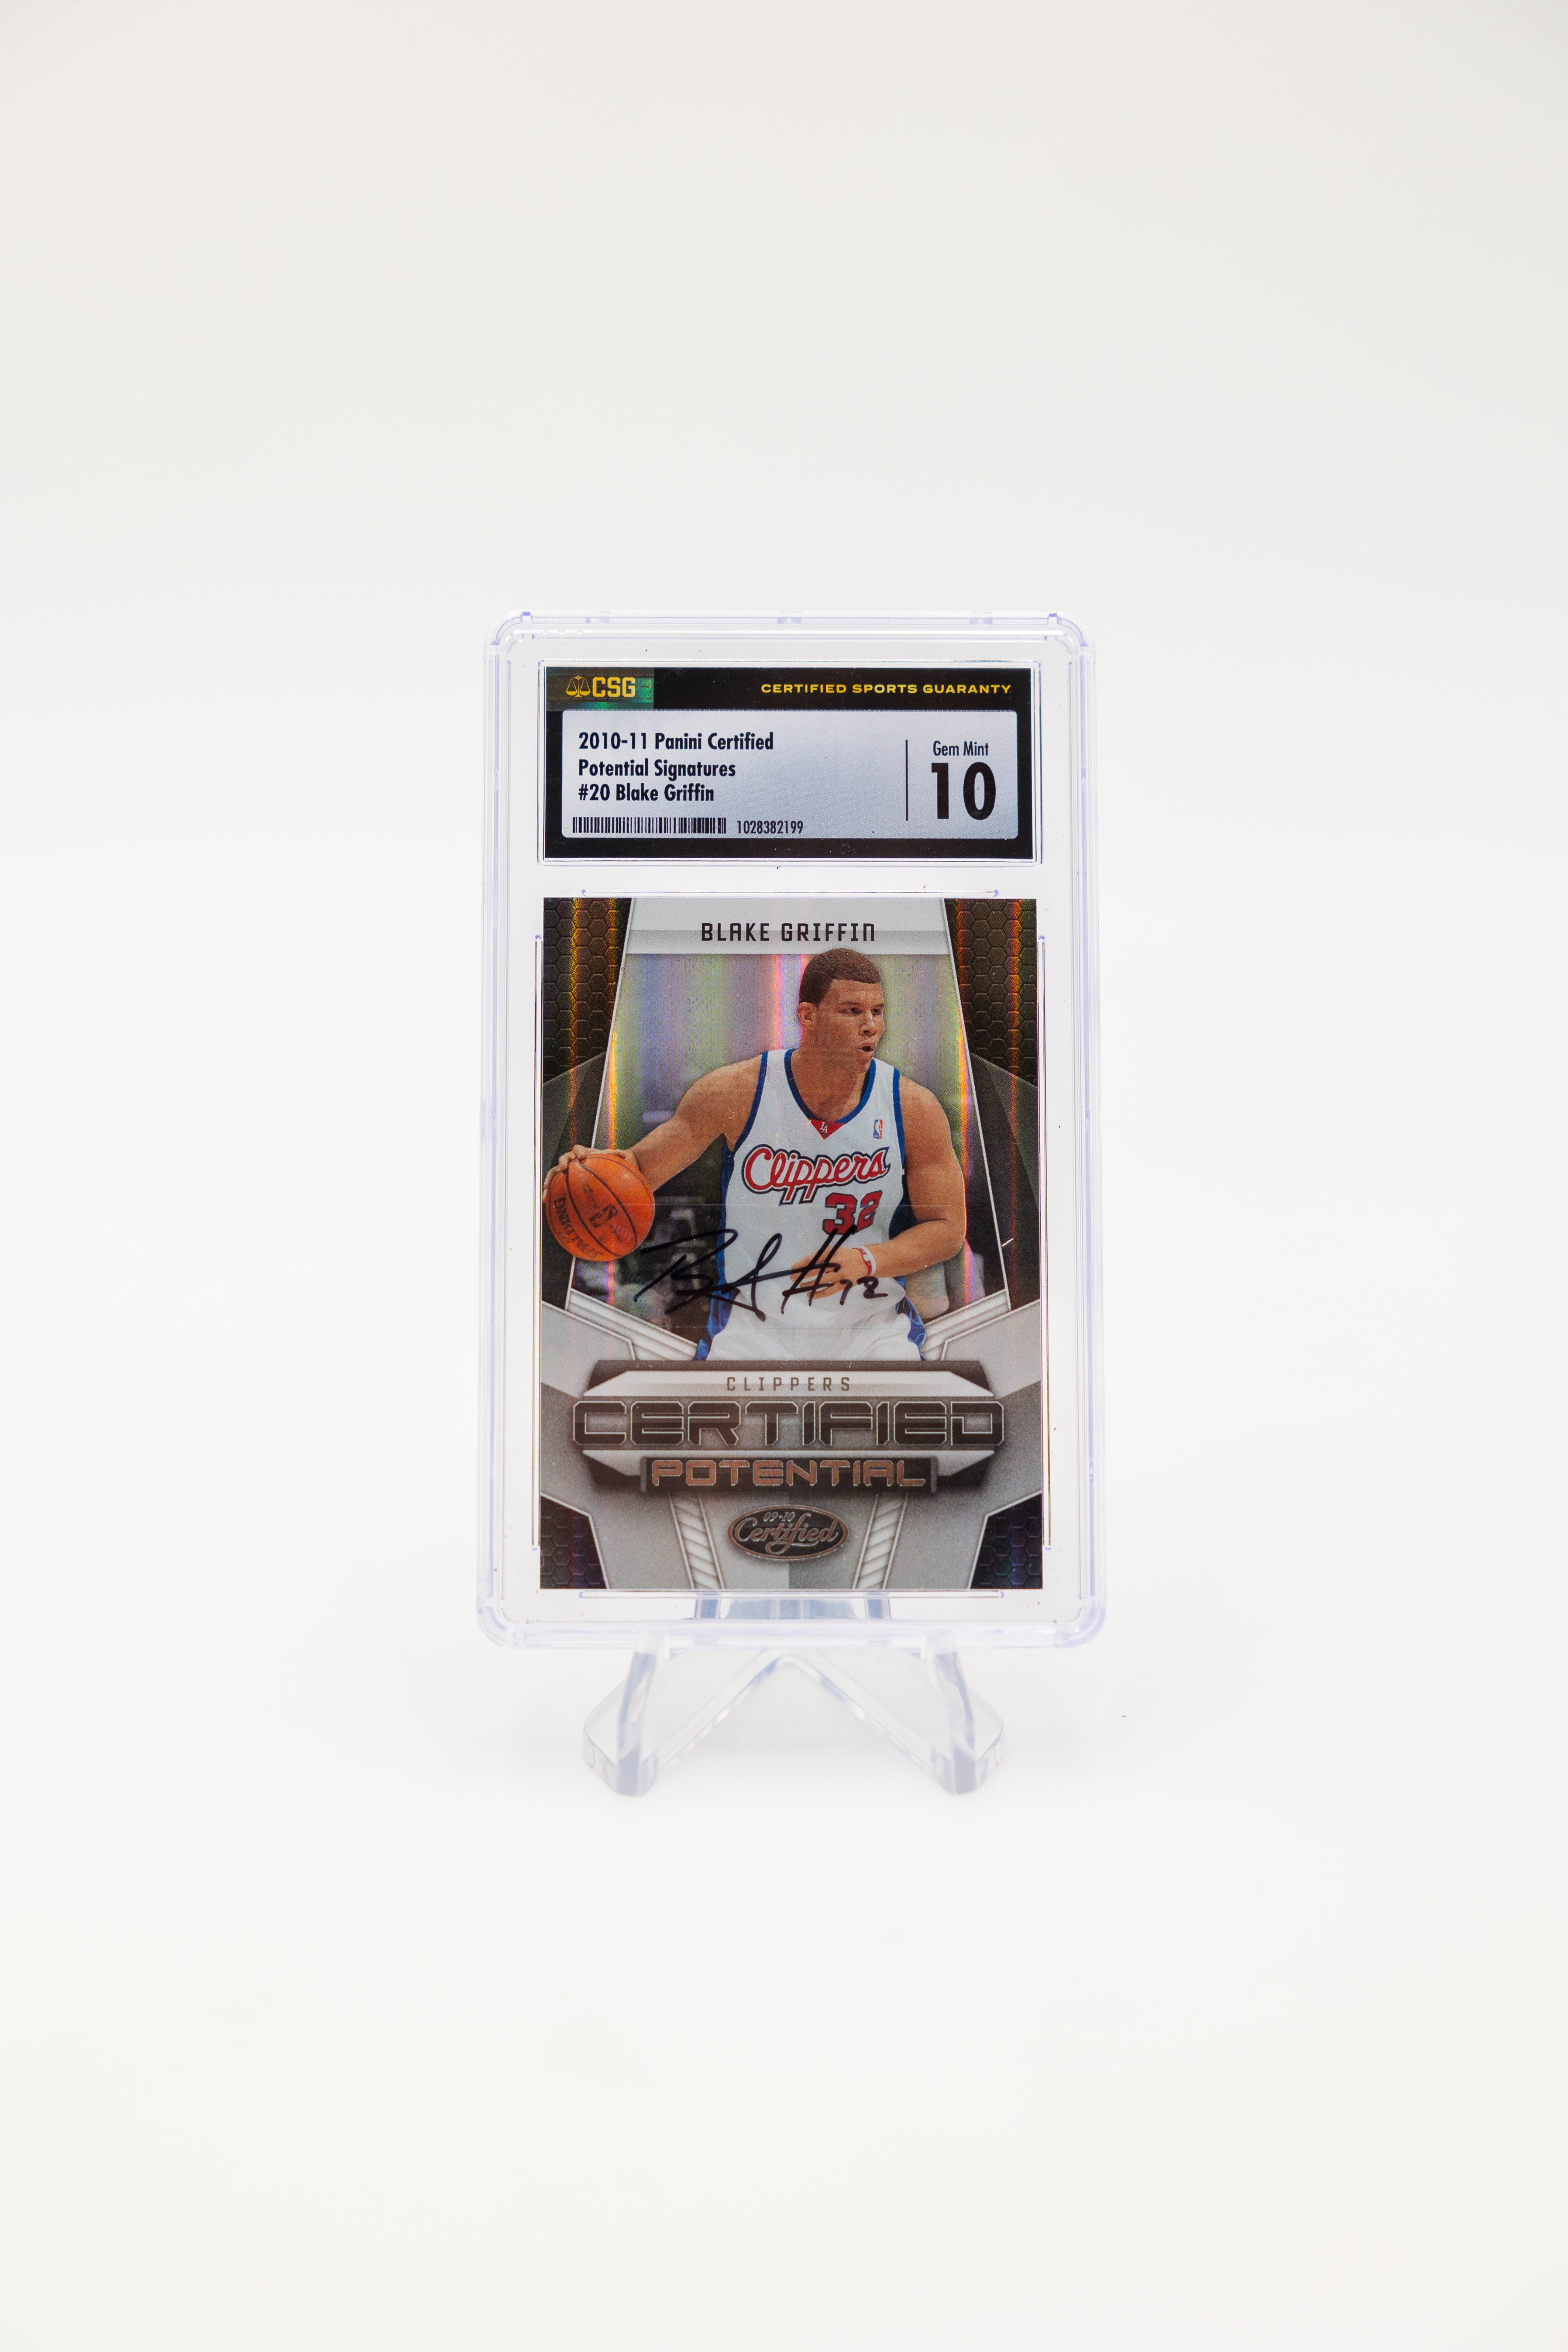 2010-11 Panini Certified - Blake Griffin 20 - Potential Signatures - CSG 10 / 10